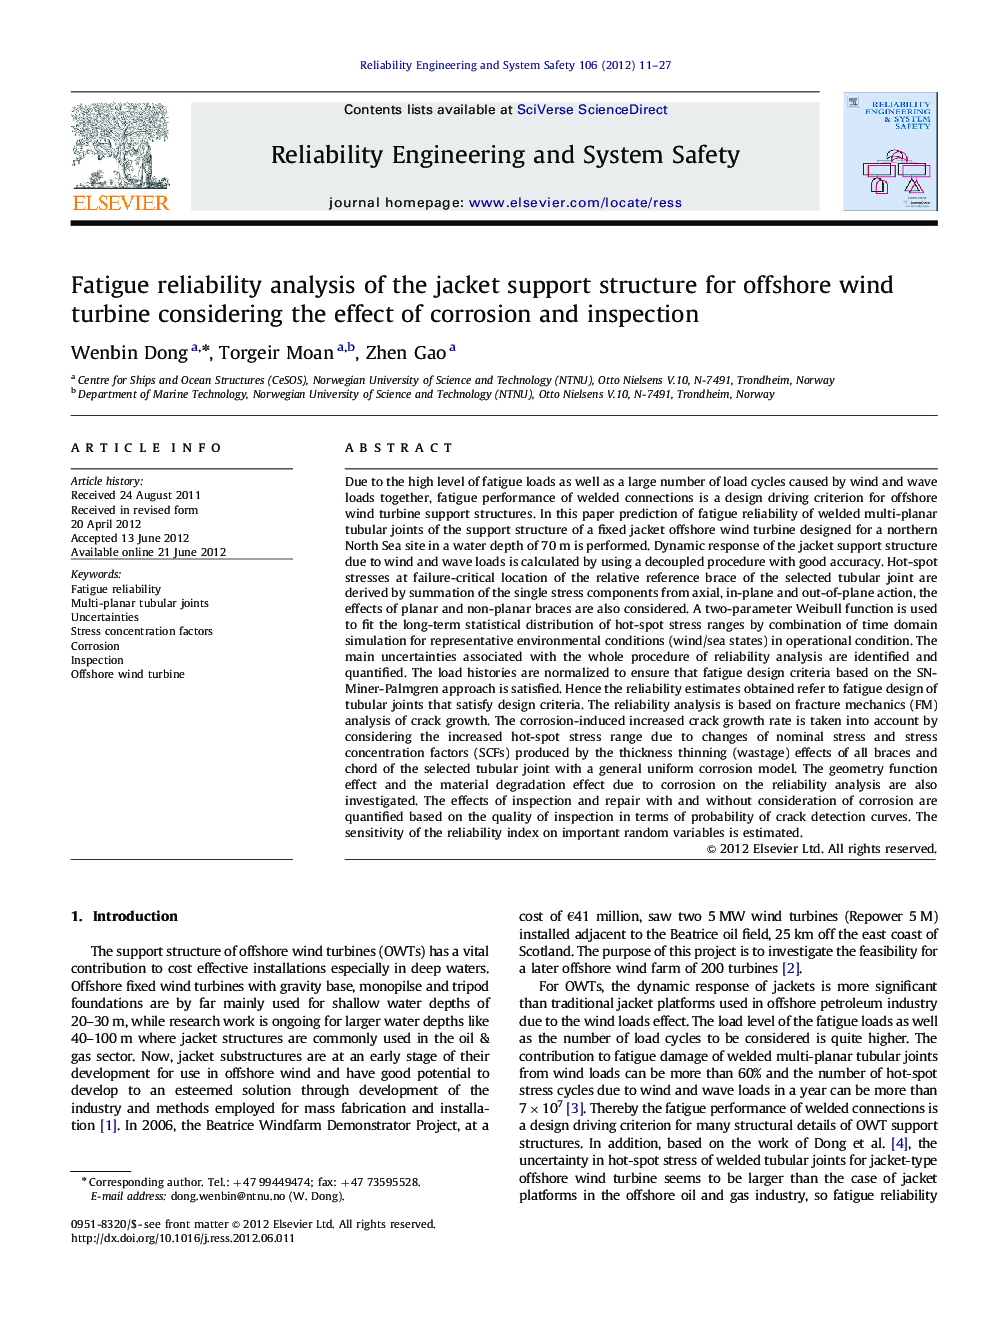 Fatigue reliability analysis of the jacket support structure for offshore wind turbine considering the effect of corrosion and inspection